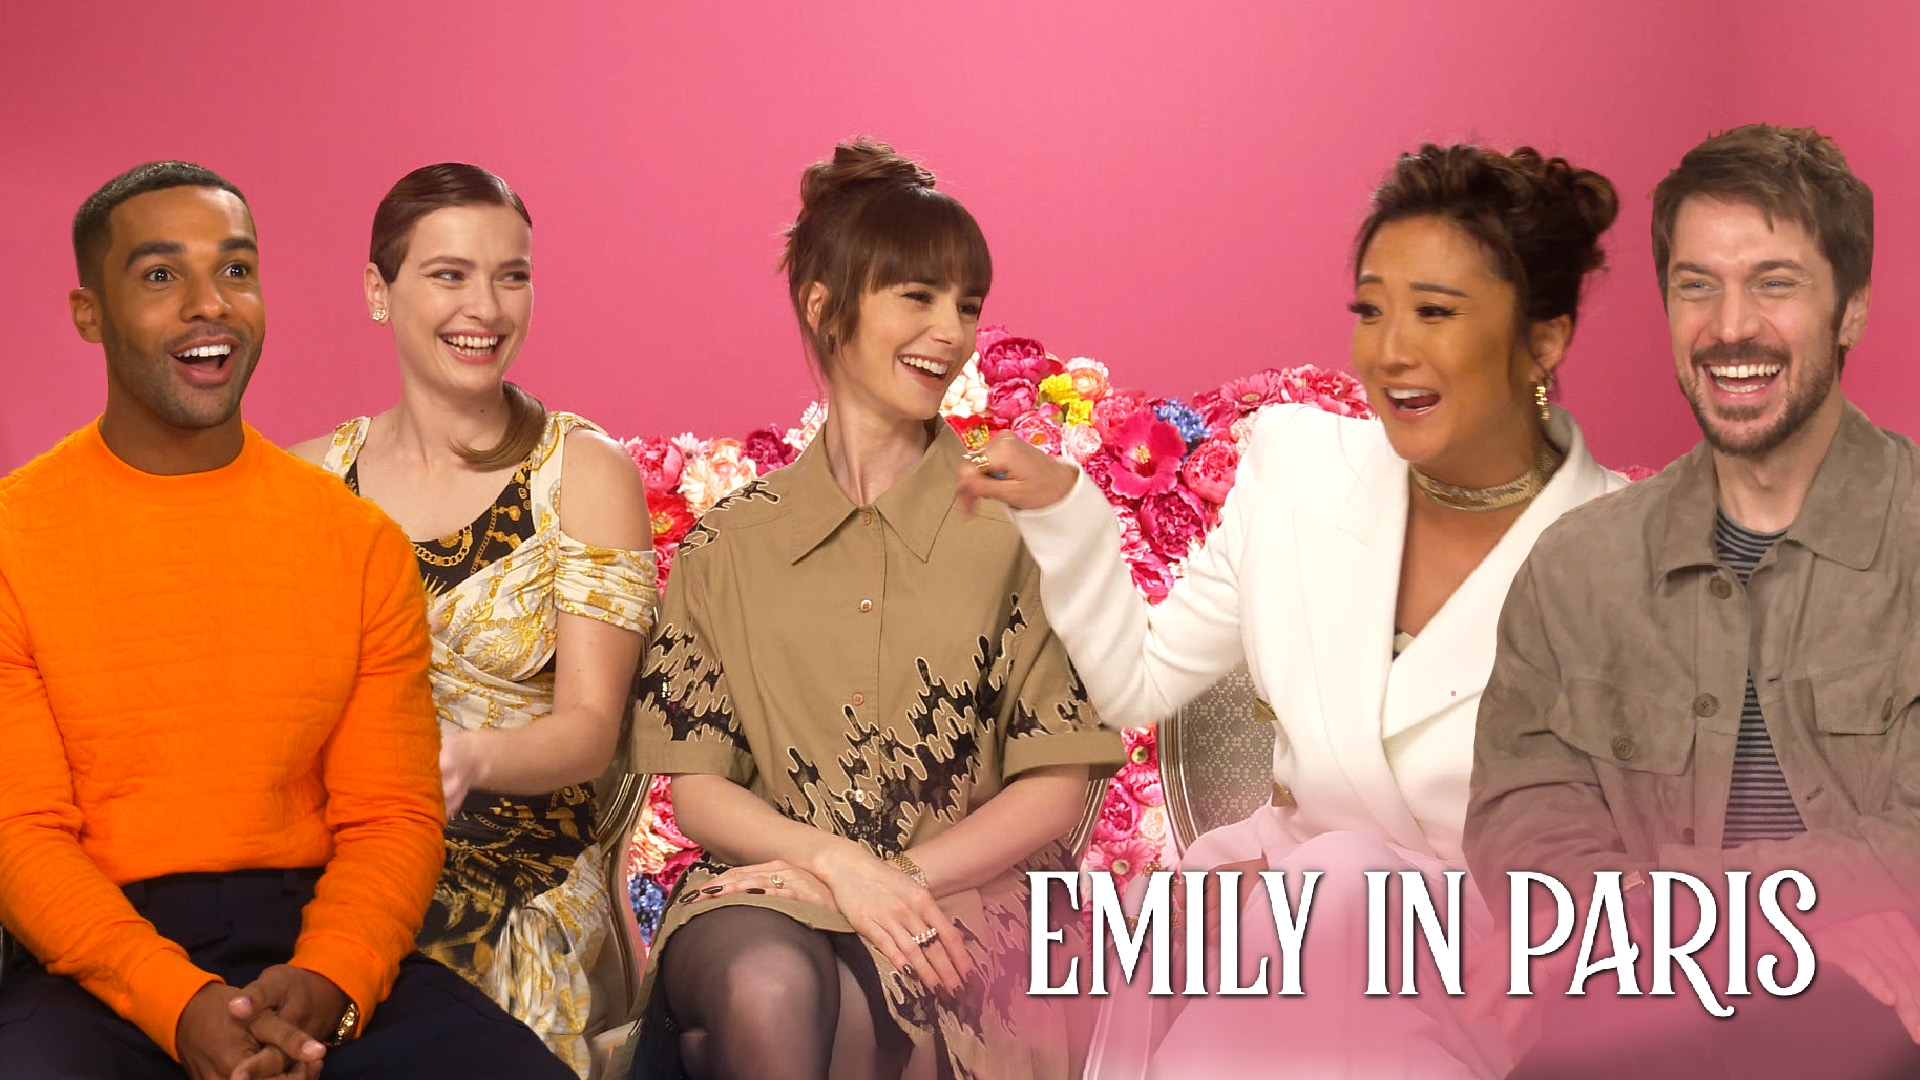 Emily in Paris' Cast: Everything to Know About the Actors